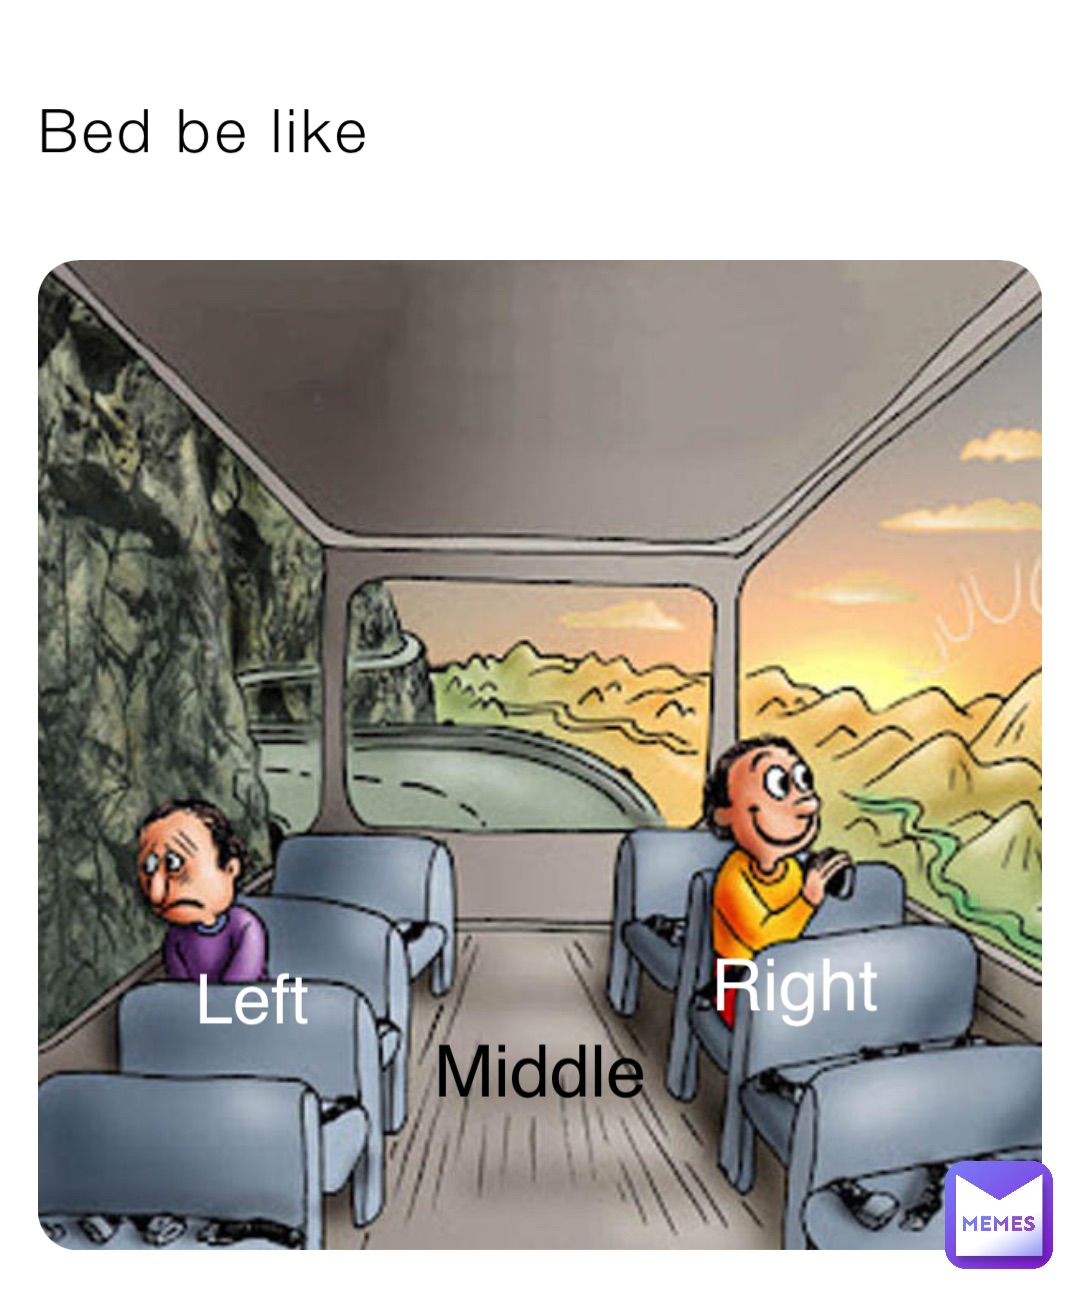 Bed be like Right Left Middle